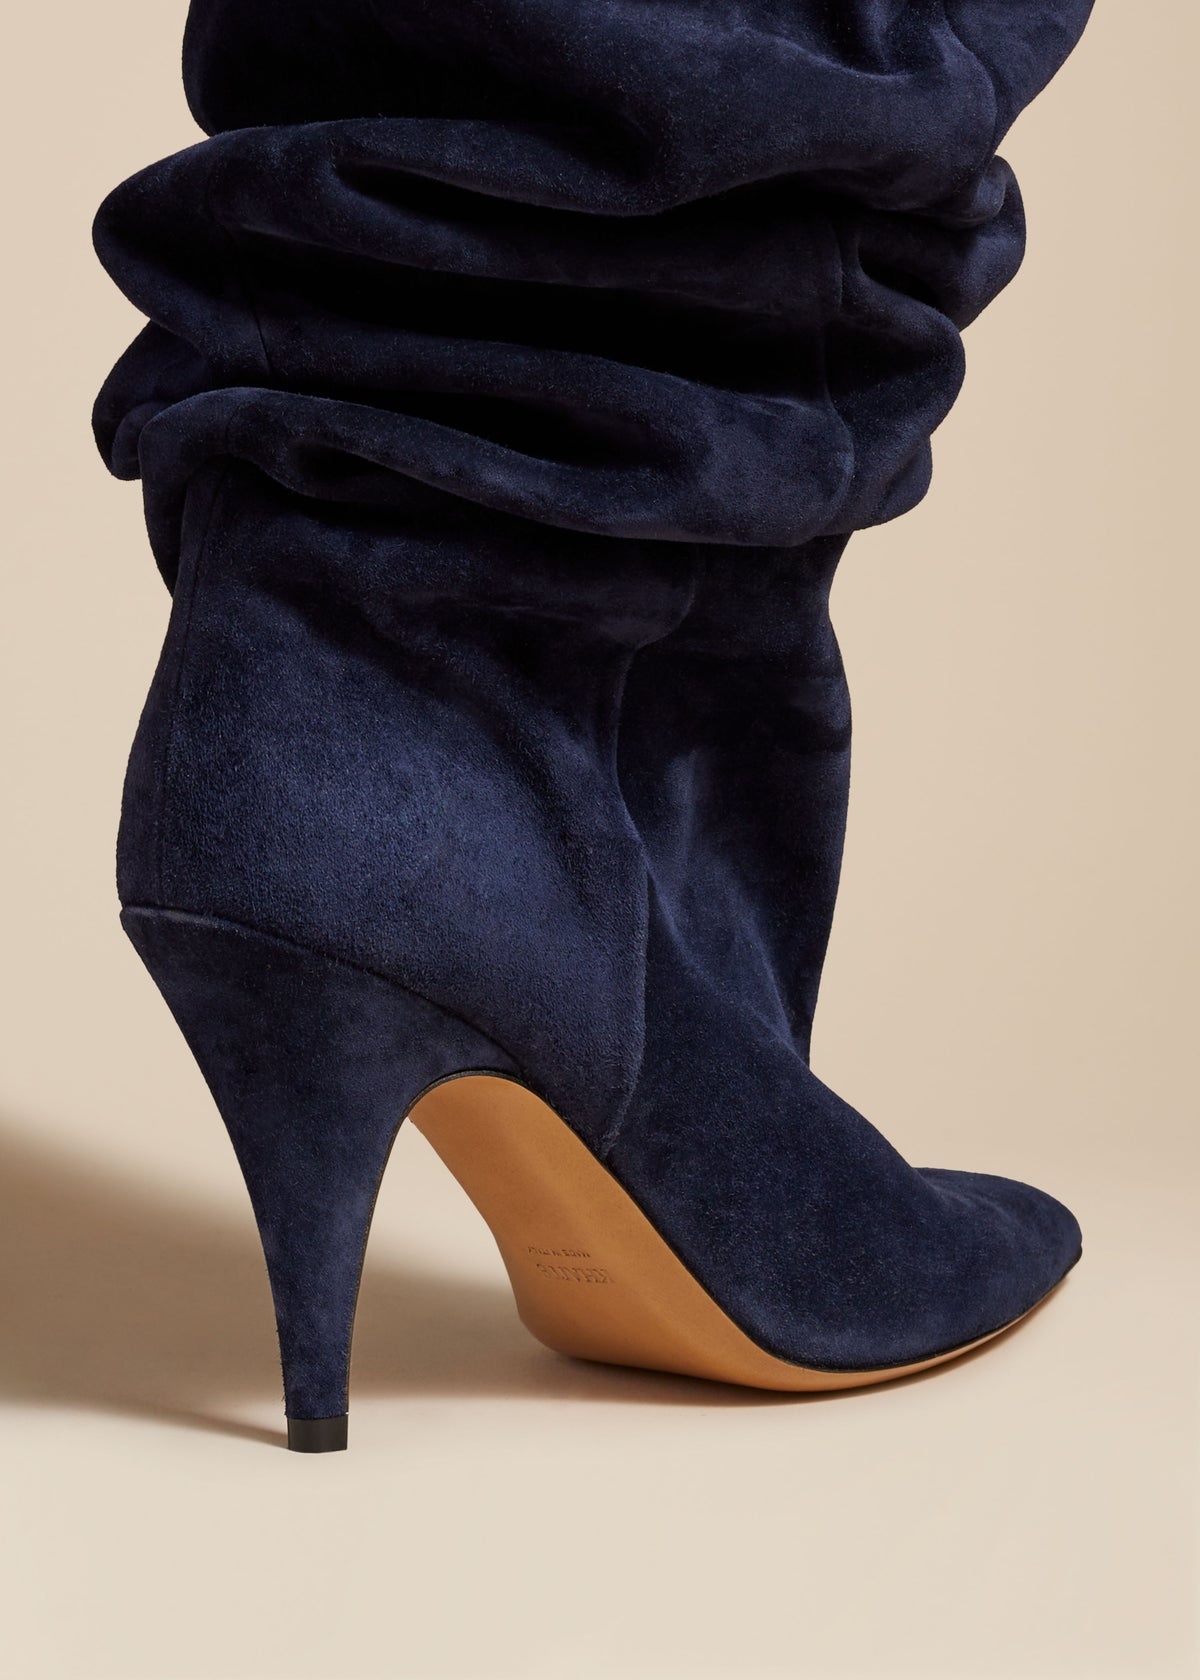 The River Knee-High Boot in Midnight Suede - 3